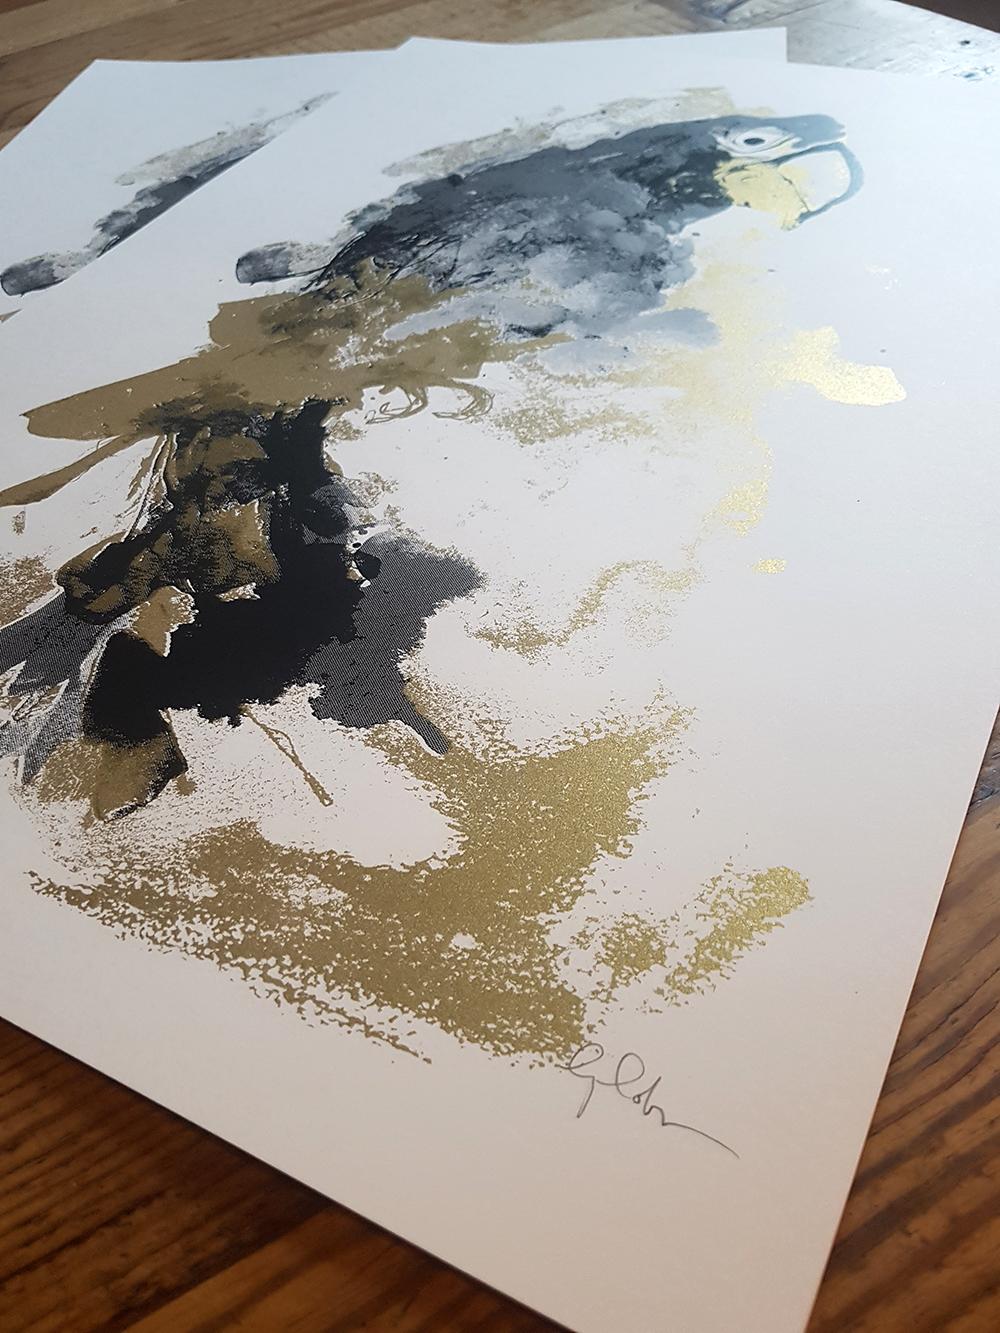 Parrot gold is a beautiful 2 layer silk screen print by Gavin Dobson.

Based on an original gouache painting, this luxurious piece of art is individually hand printed by the artist using half tones to create the textures and shades running through